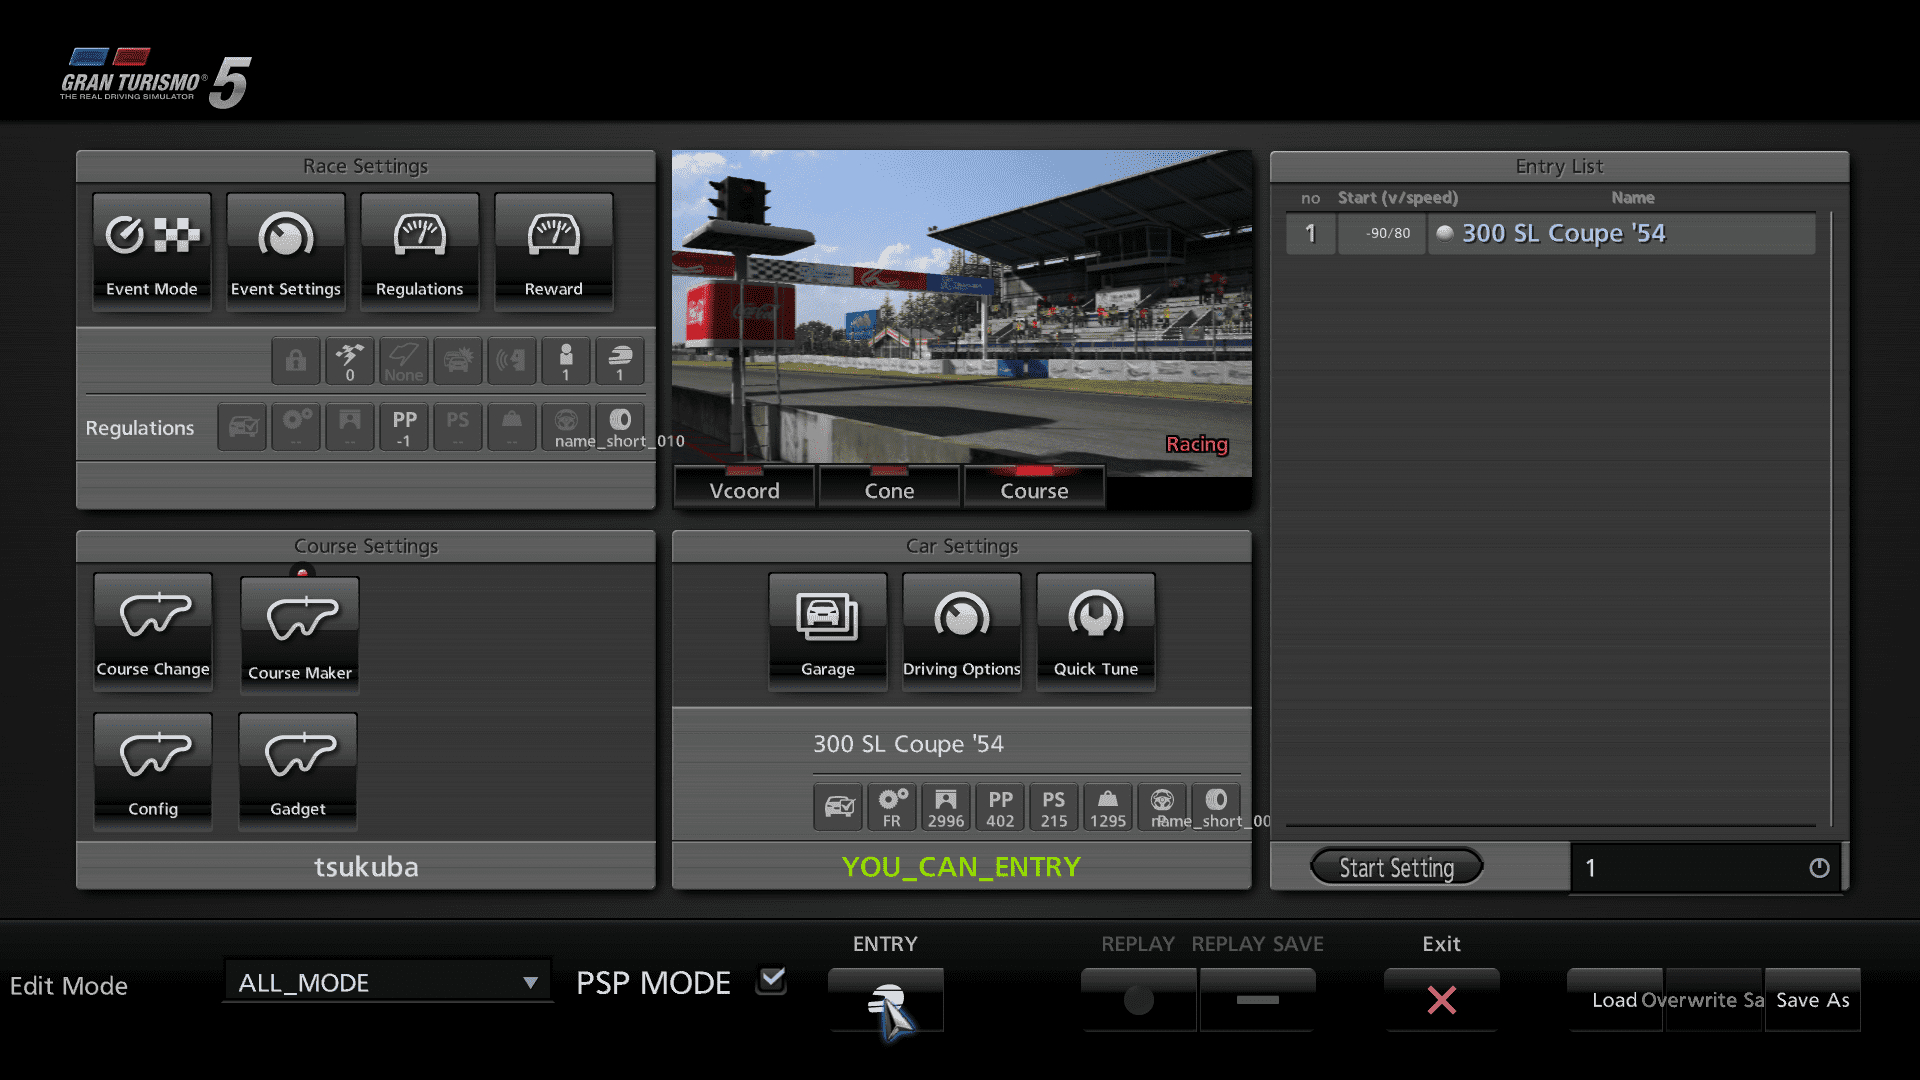 Guide for playing Gran Turismo 5 online using the hidden LAN Mode. · GitHub